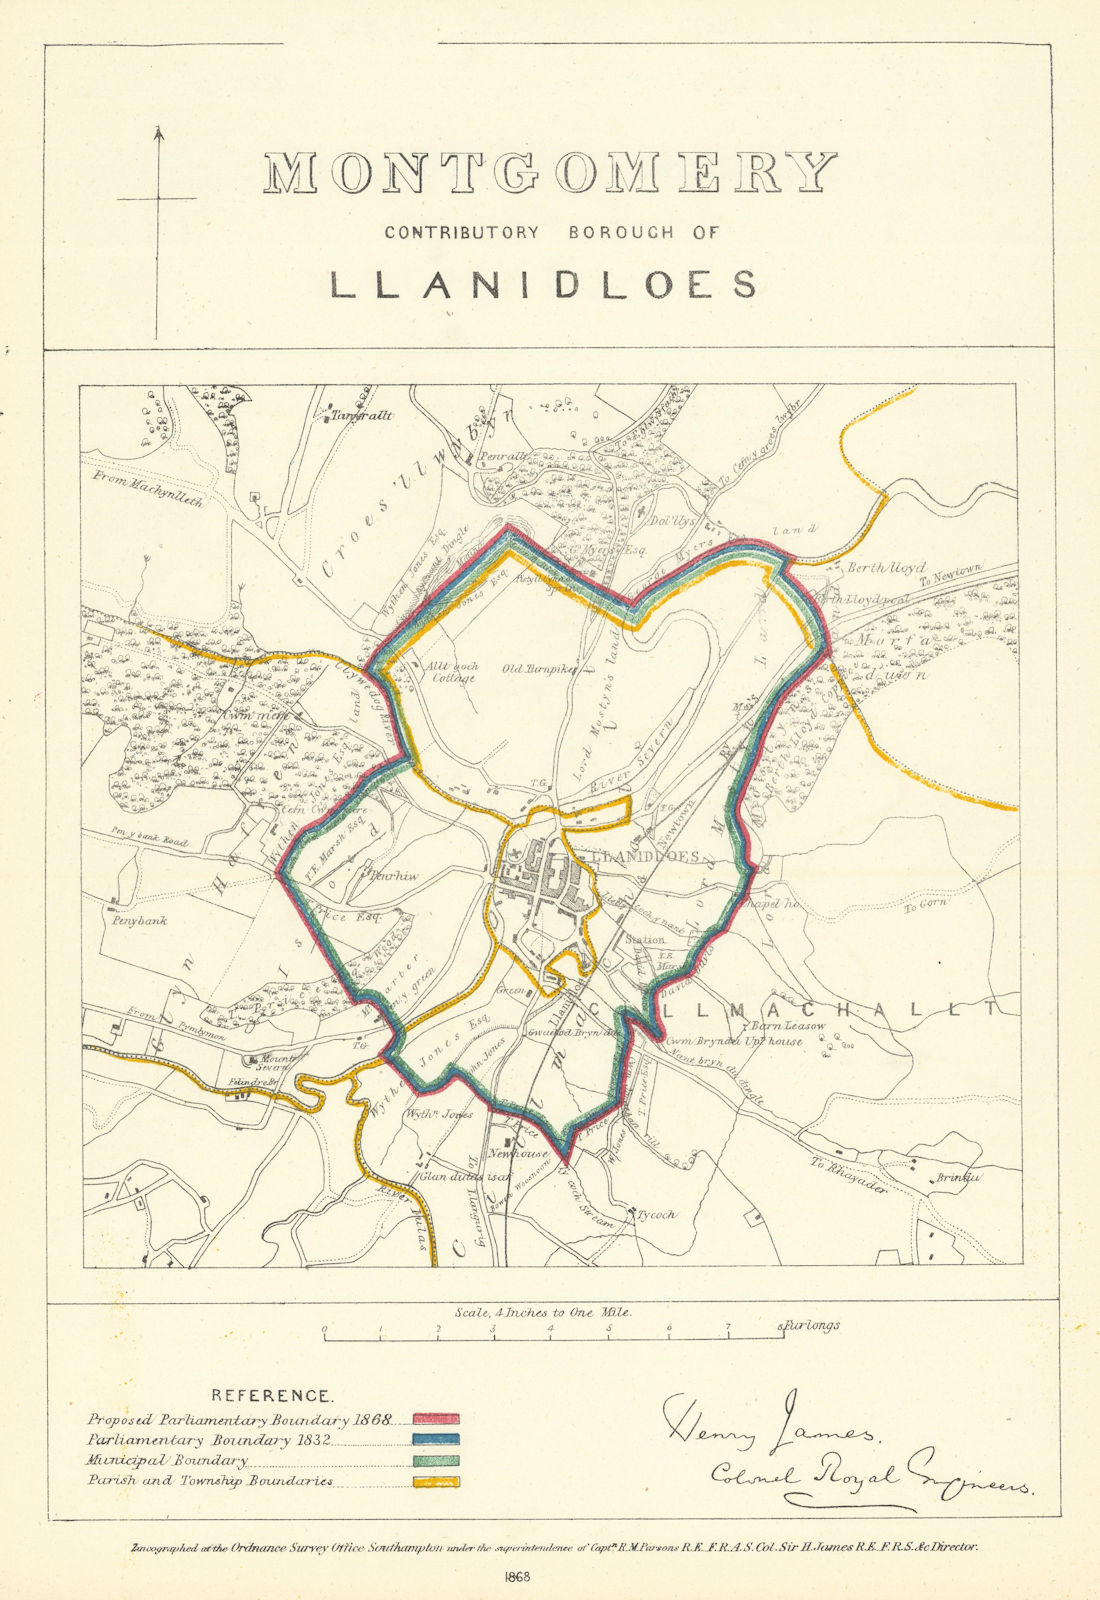 Montgomery Contrib'y Borough of Llanidloes. JAMES. Boundary Commission 1868 map